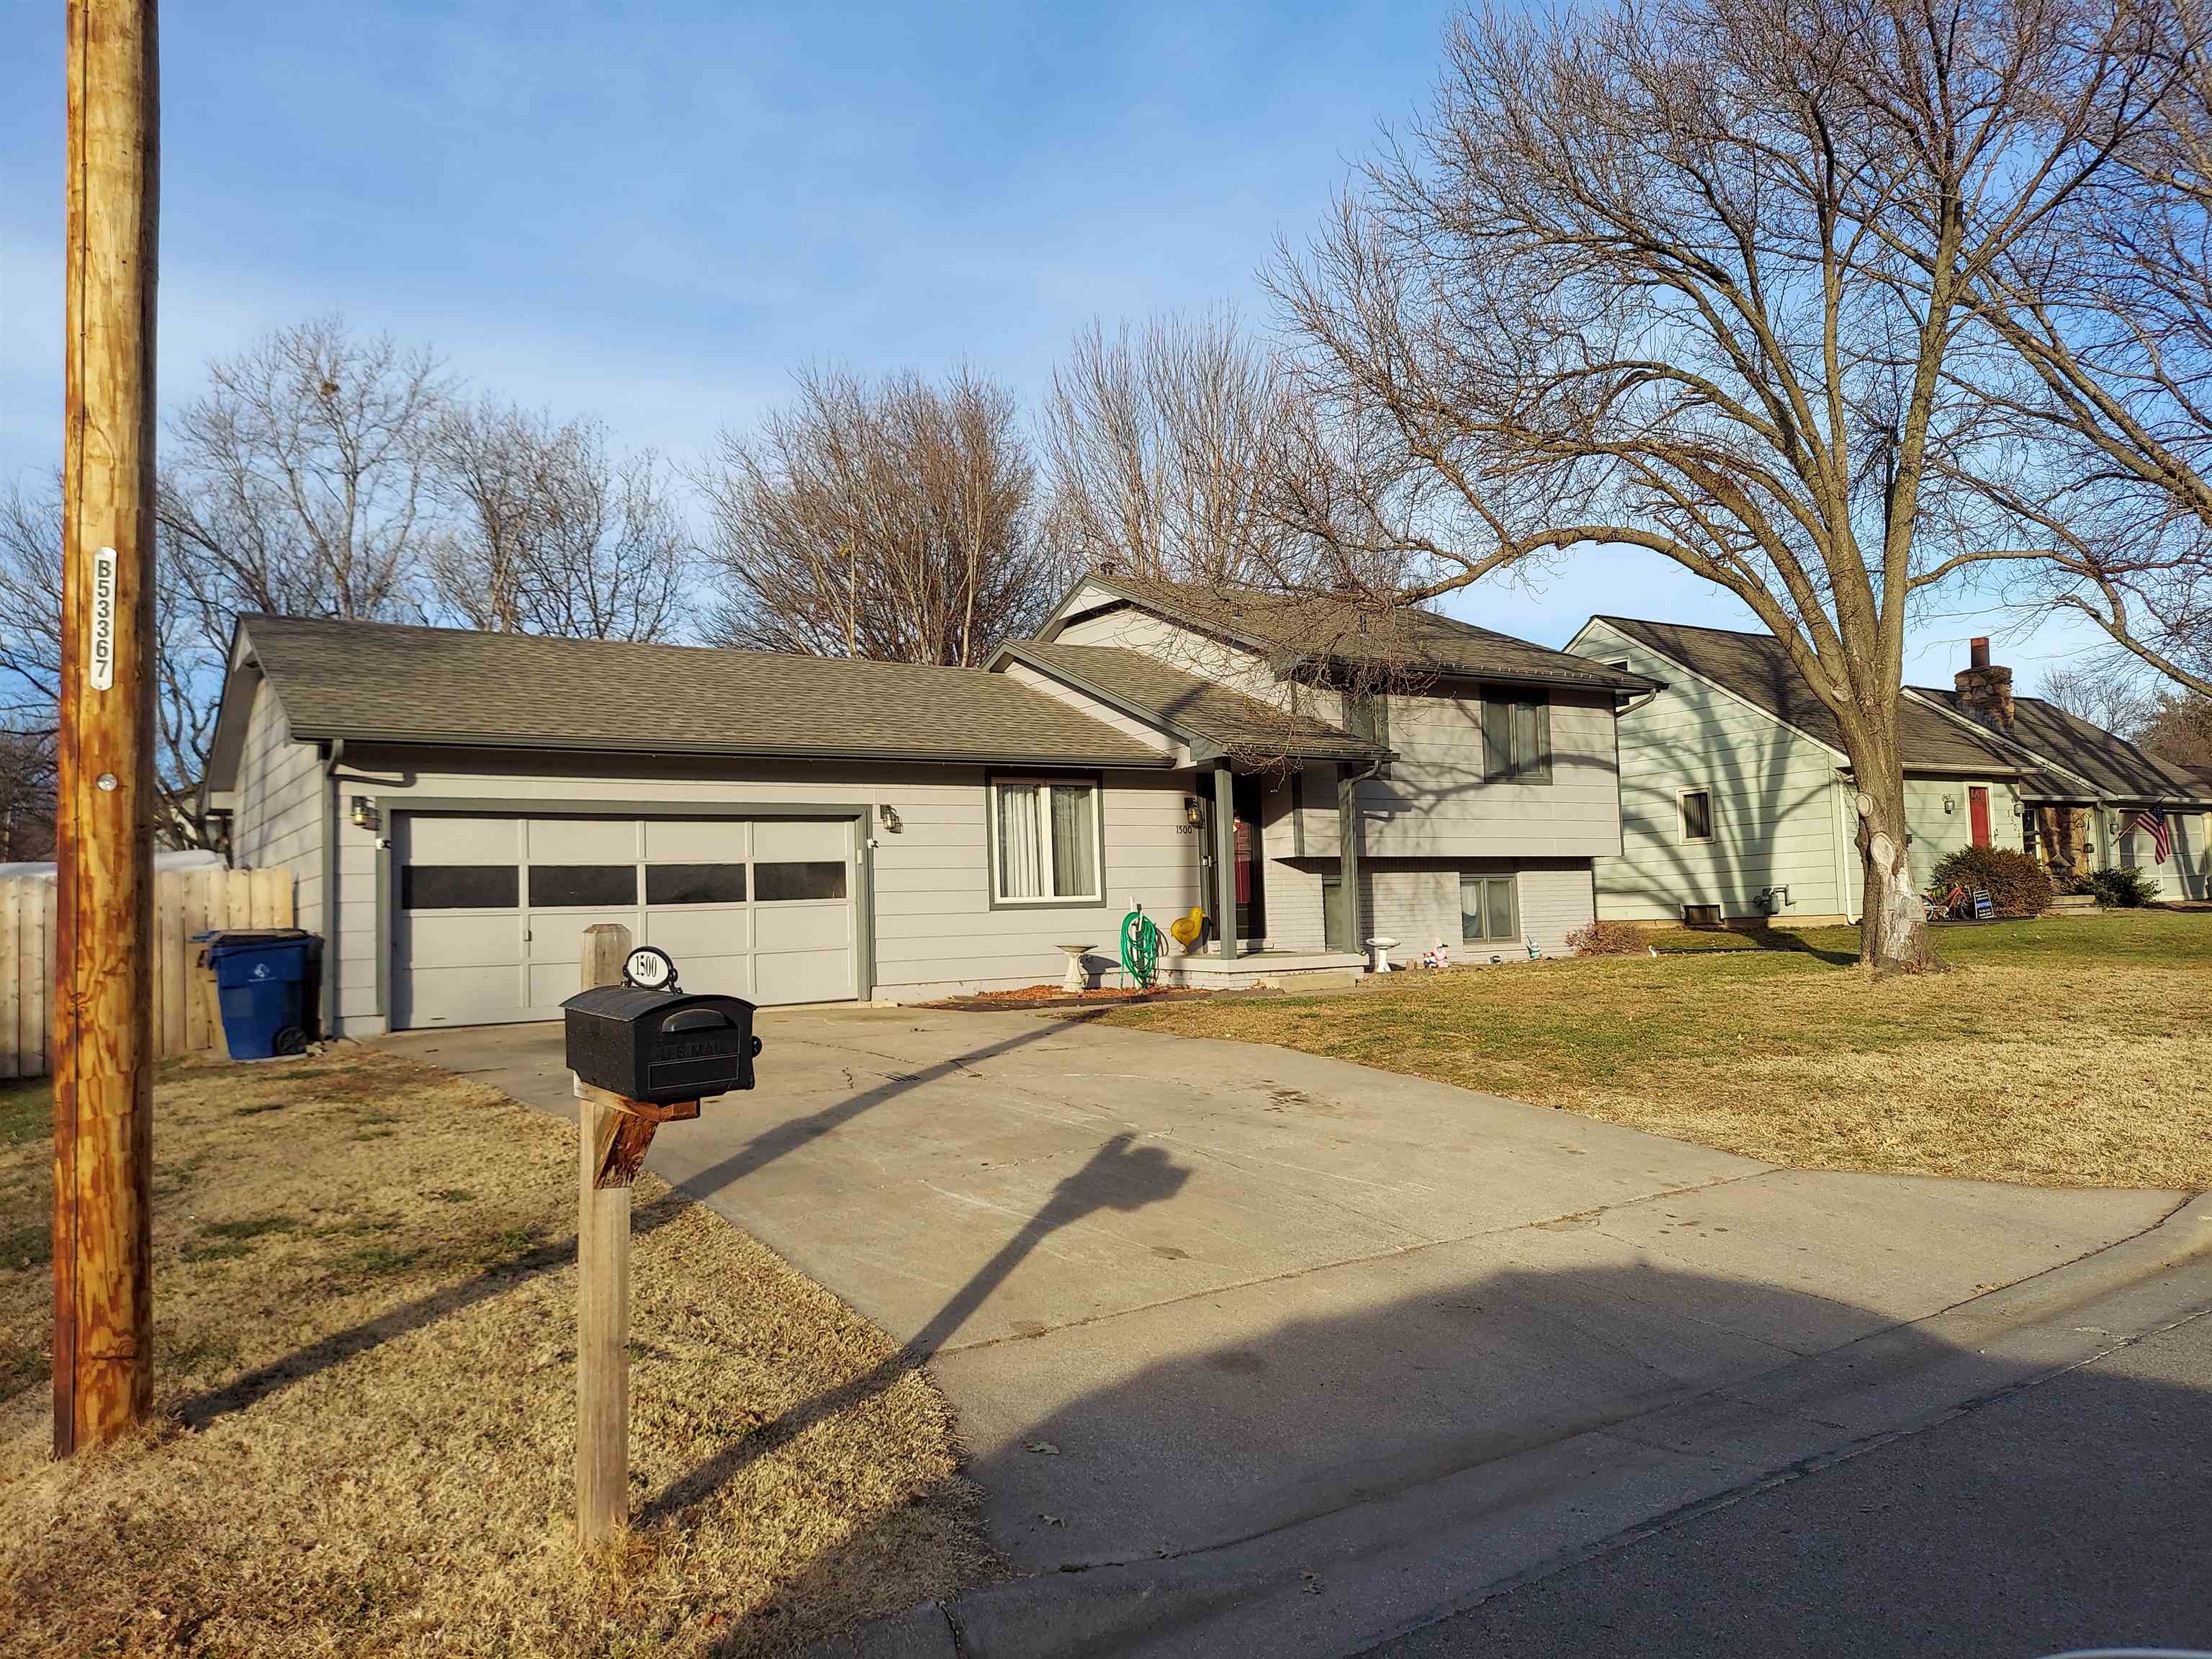 Beautiful Quad-Level home in Derby Ks just waiting for a new family. Very well maintained and has on